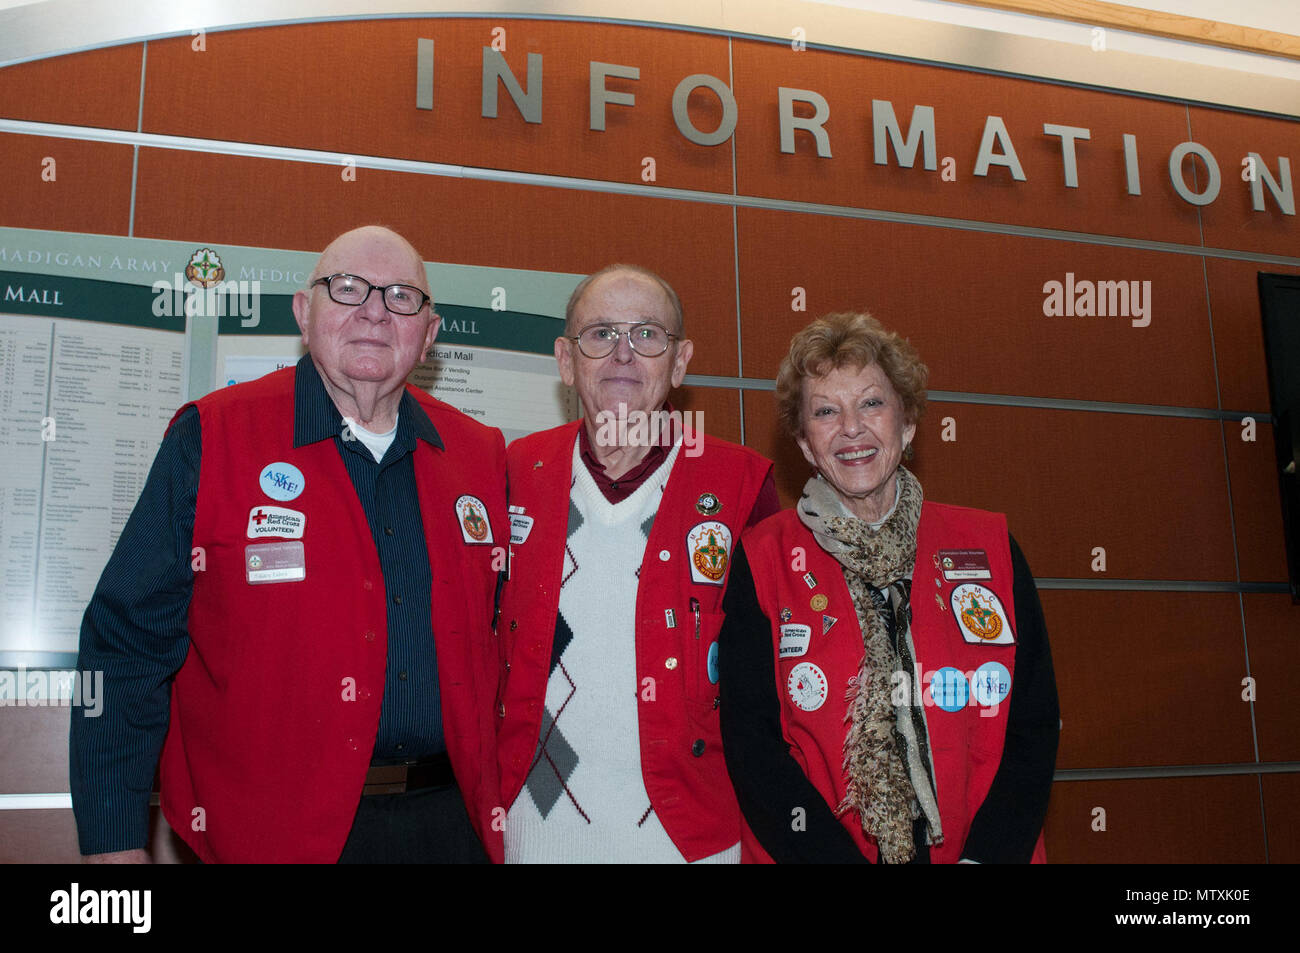 (From left to right) Gary Leakes, Aldro Grieco, and Pat Trobaugh, volunteers with the American Red Cross Madigan Army Medical Center Volunteer Program, pause for a photo near the front information desk of the MAMC Joint Base Lewis-McChord, Washington, Jan. 18. The Red Cross volunteer program at MAMC aims to provide quality of care, directions and personal care to service members, their dependents and veterans. (U.S. Army photo by Sgt. David N. Beckstrom, 5th Mobile Public Affairs Detachment, I Corps) Stock Photo